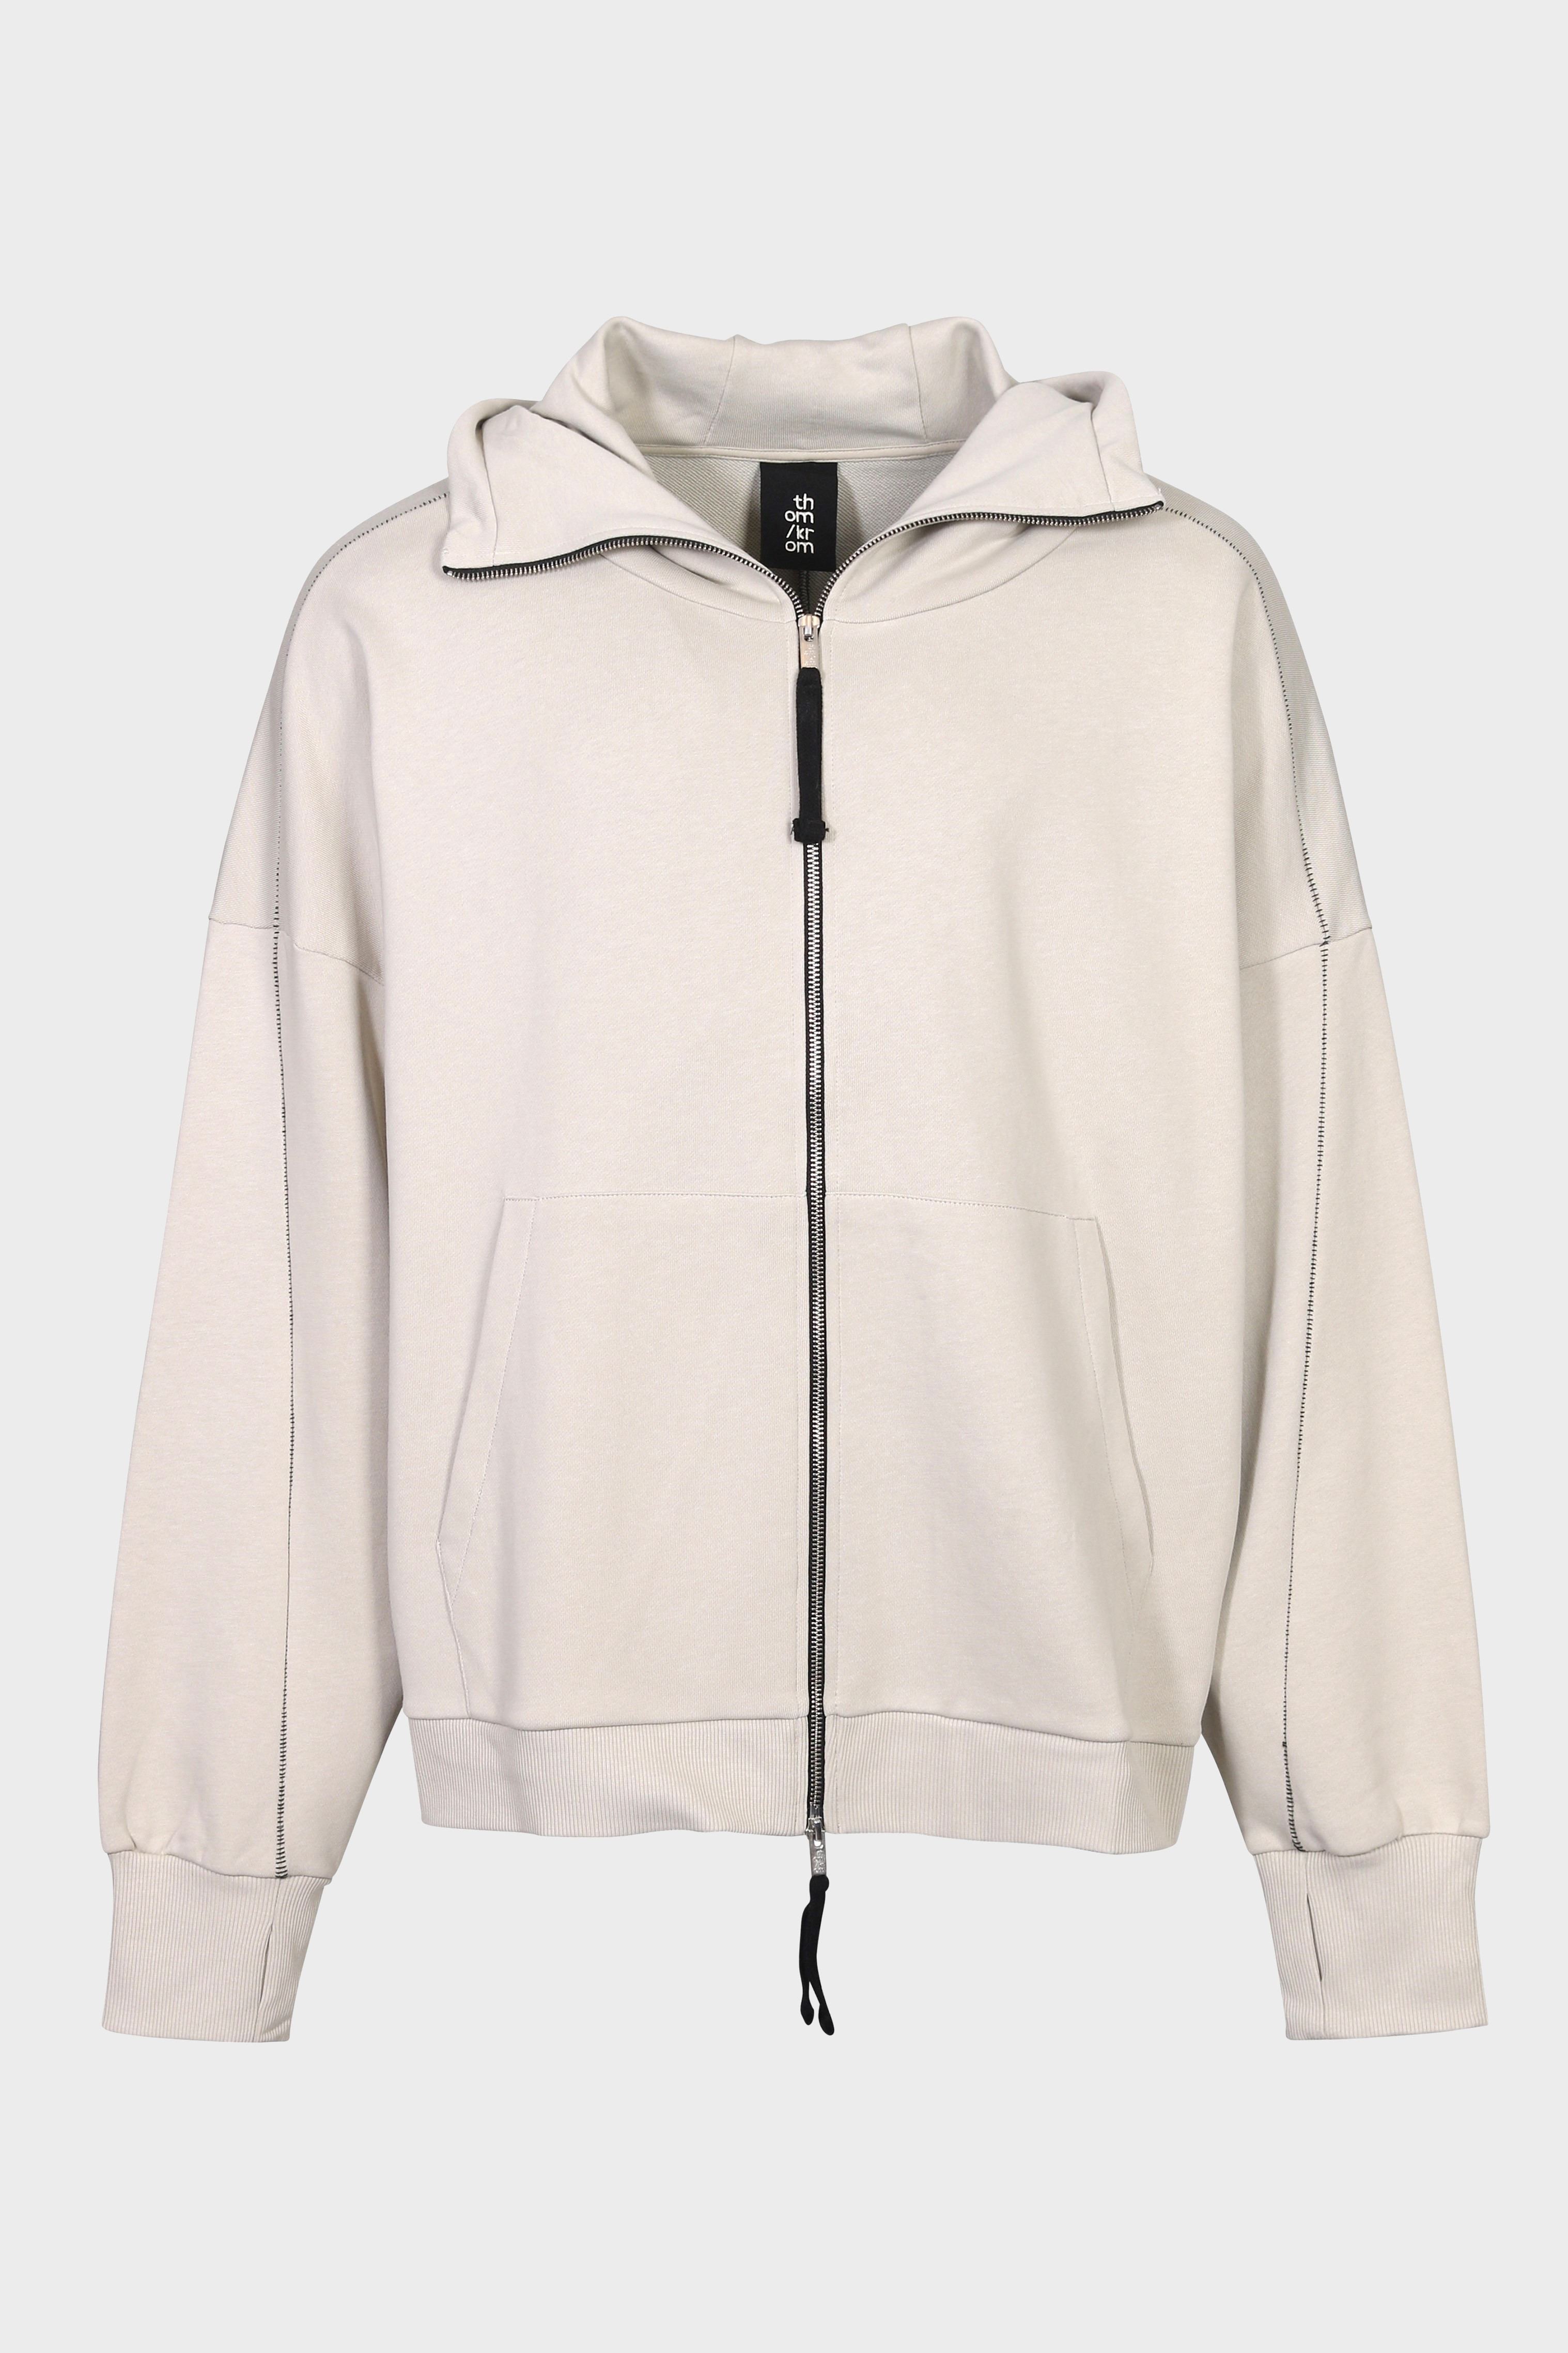 THOM KROM Oversize Zip Hoodie in Sand Shell S